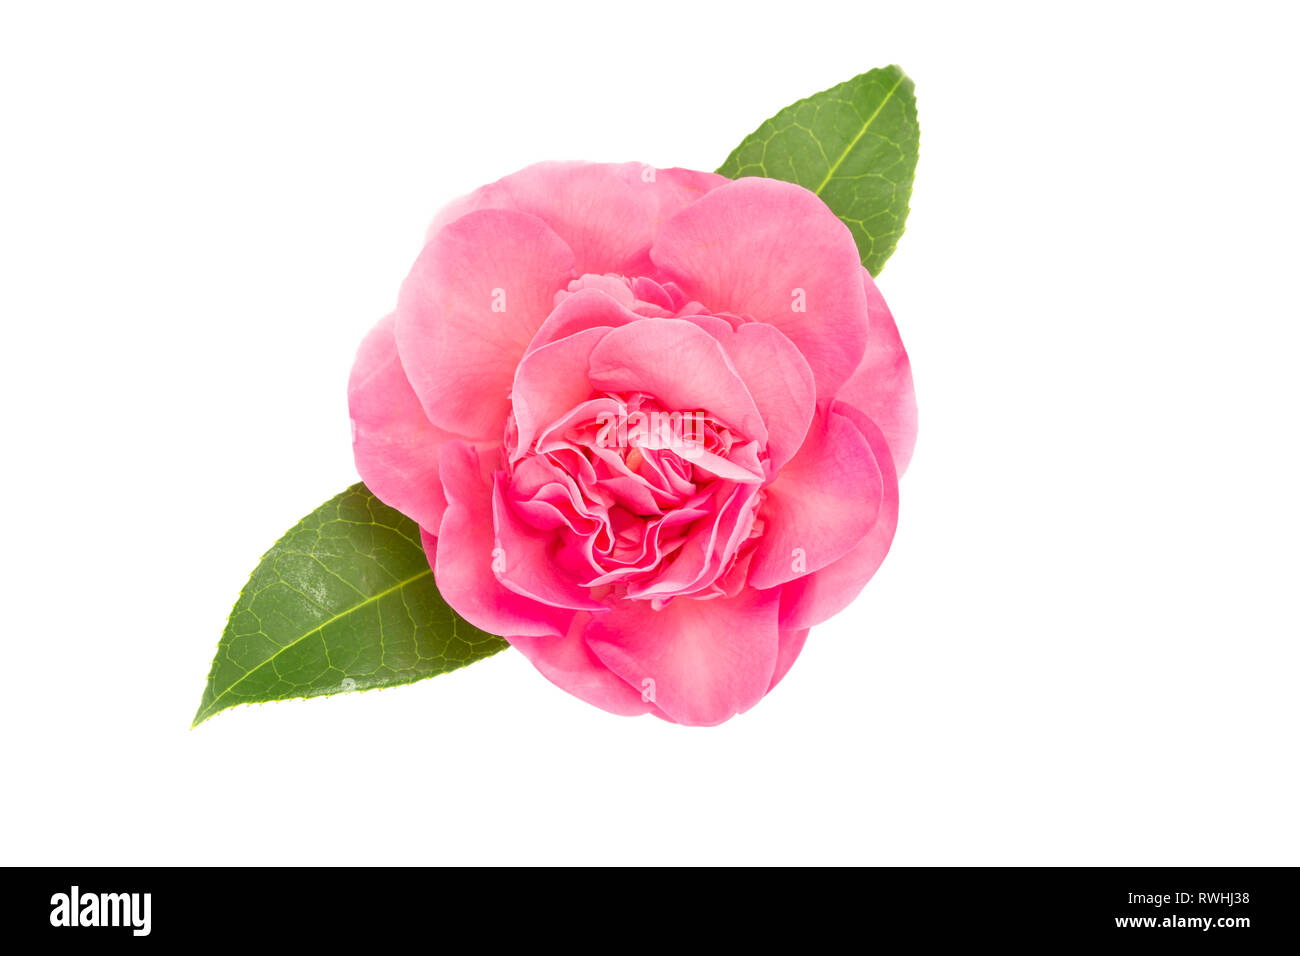 Pink camellia flower isolated on white background. Camellia japonica Stock Photo